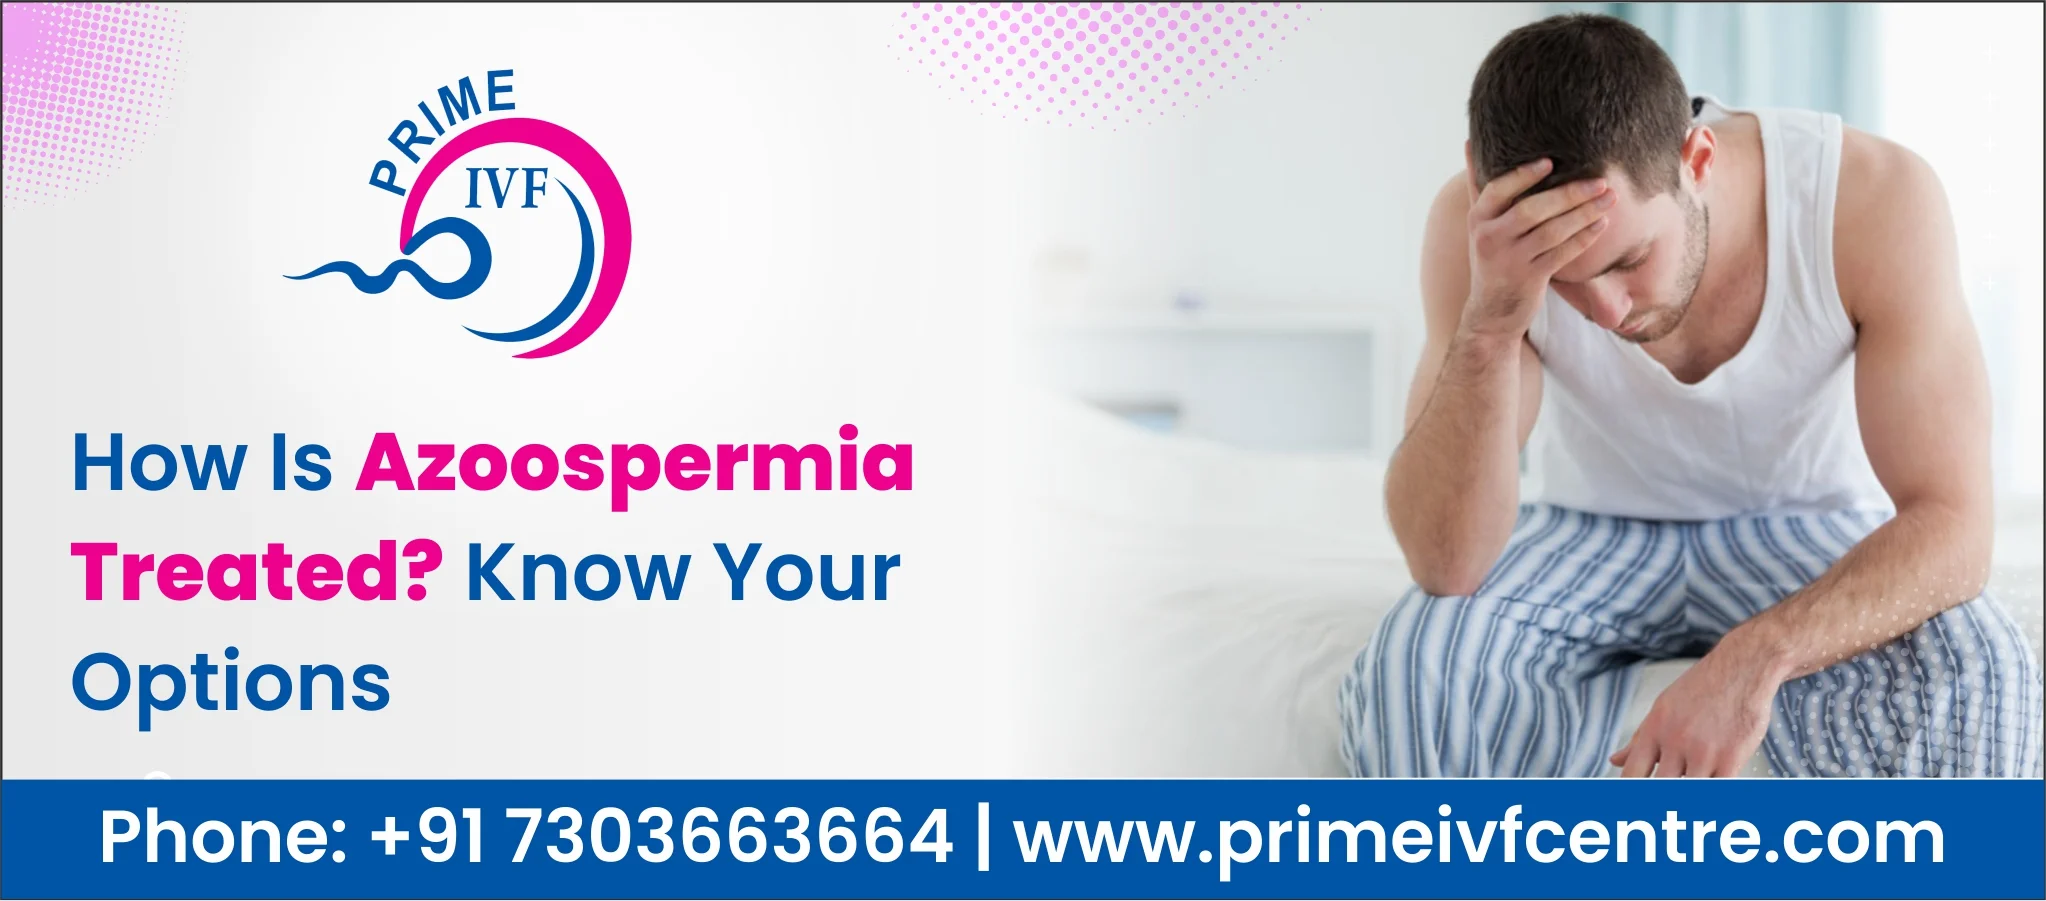 How Is Azoospermia Treated? Know Your Options